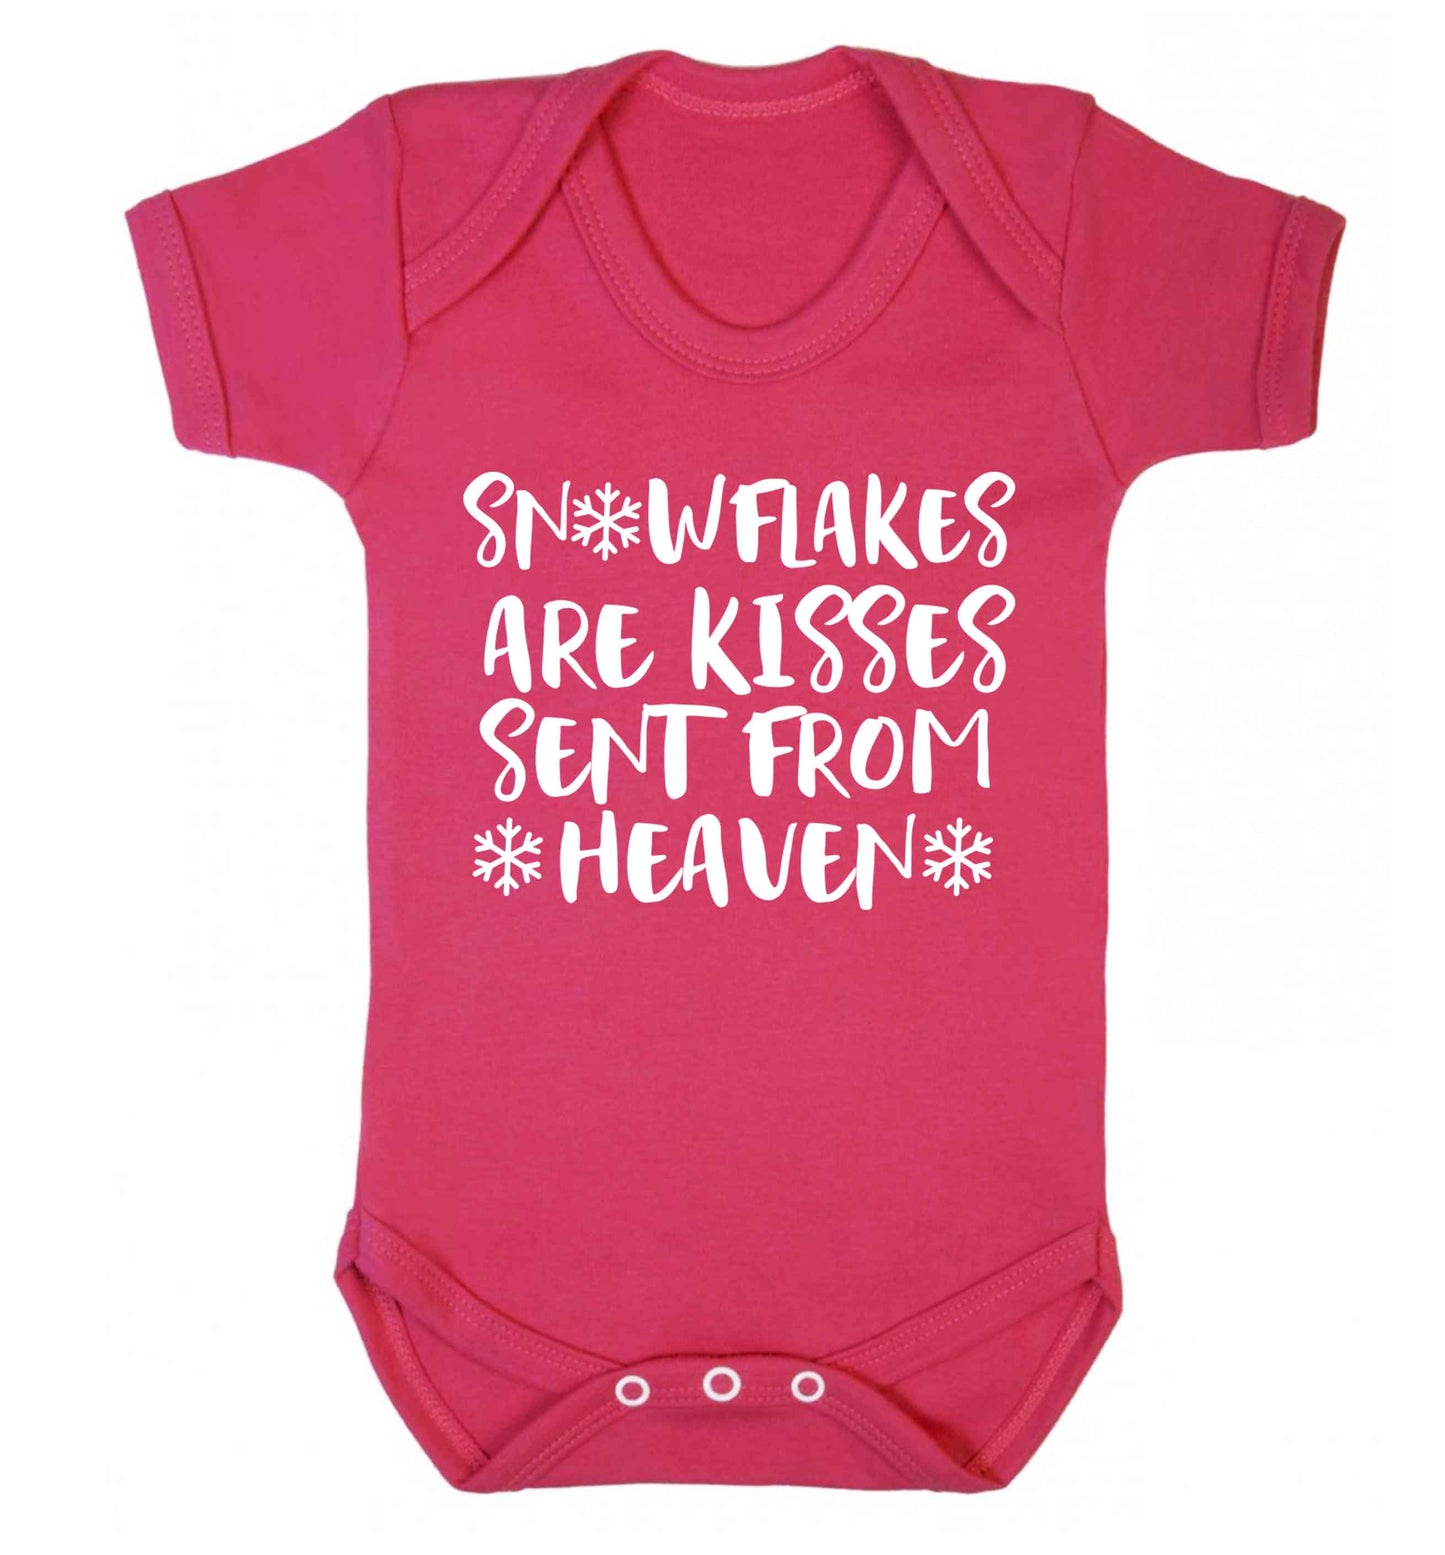 Snowflakes are kisses sent from heaven Baby Vest dark pink 18-24 months